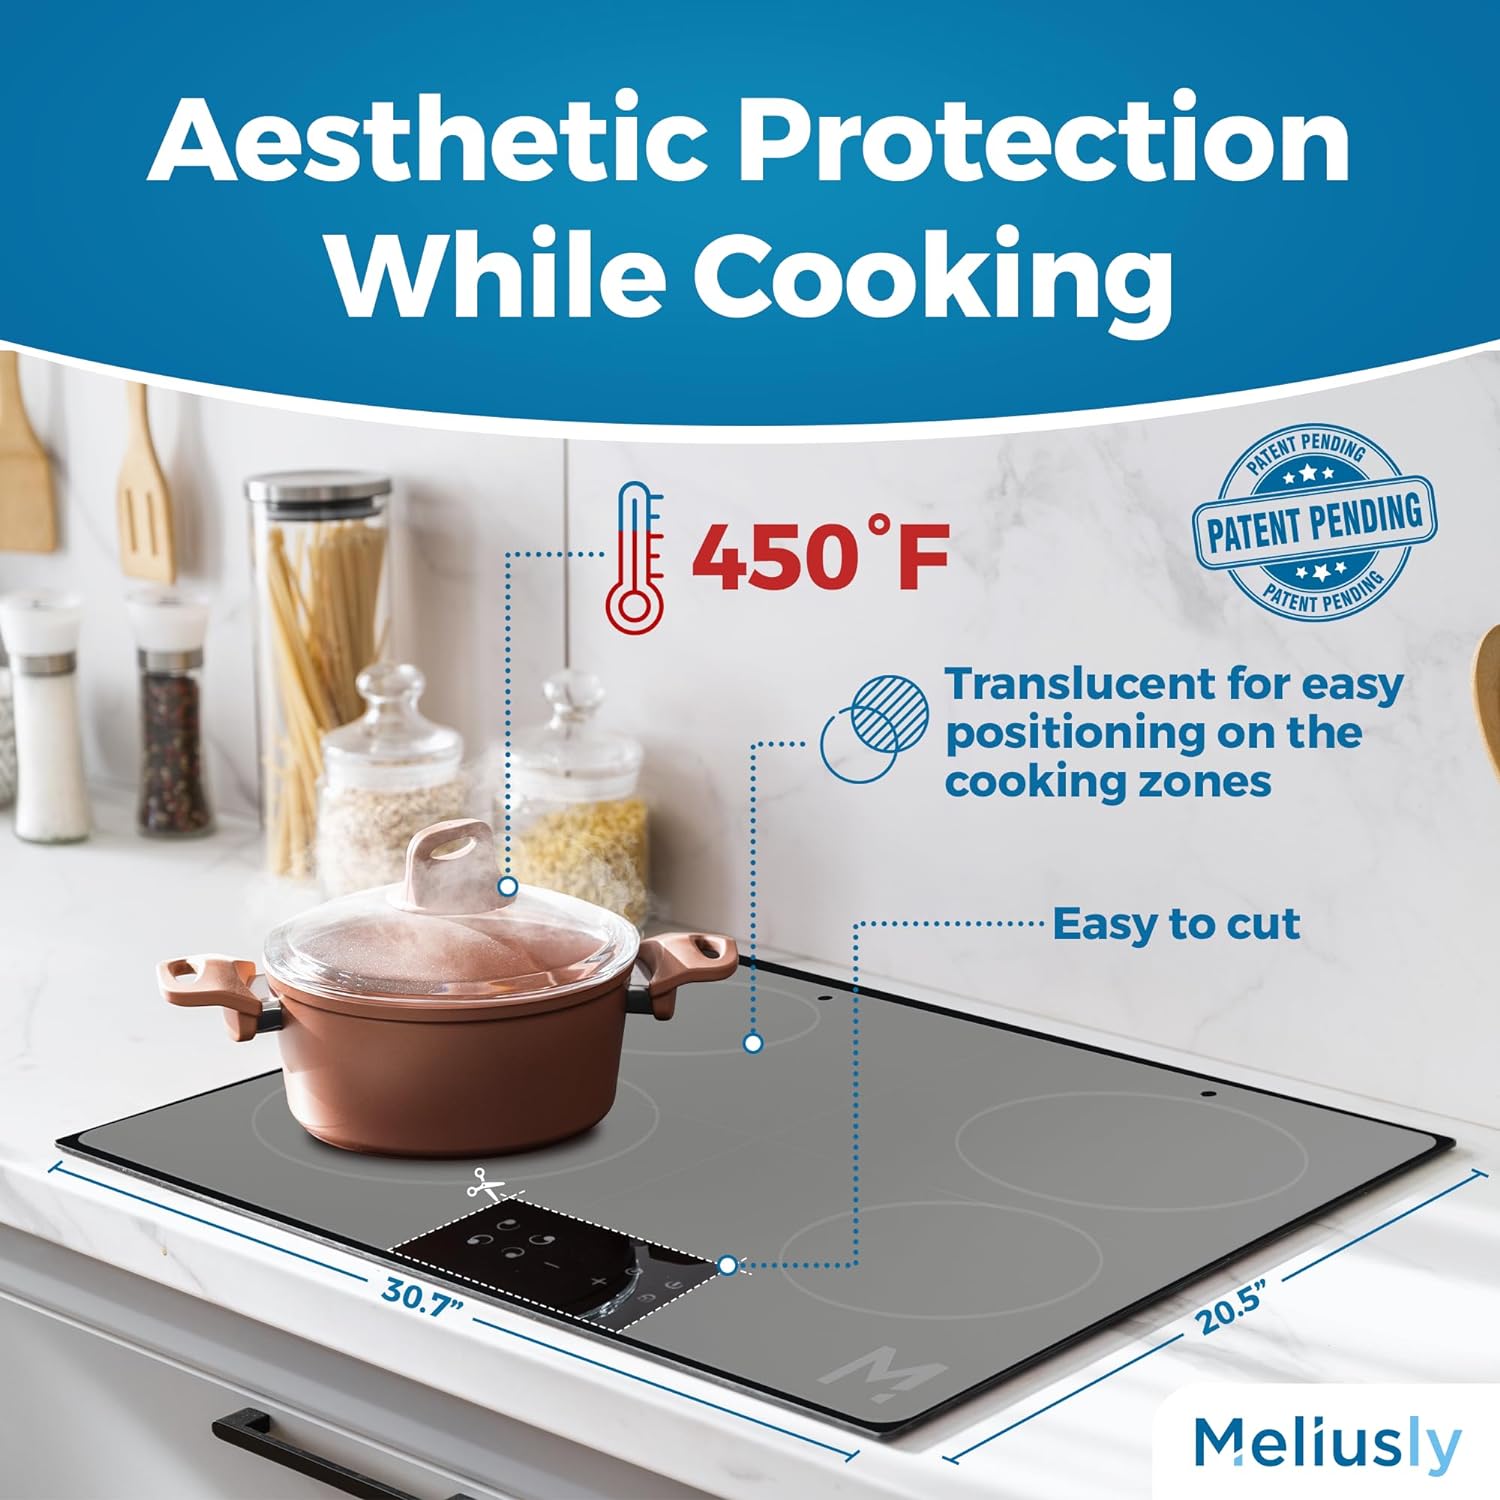 Meliusly Silicone Stove Cover (20x28) Premium Silicone Stove Top Protector, Silicone Electric Stove Top Covers, Silicone Mat for Glass Stove Top